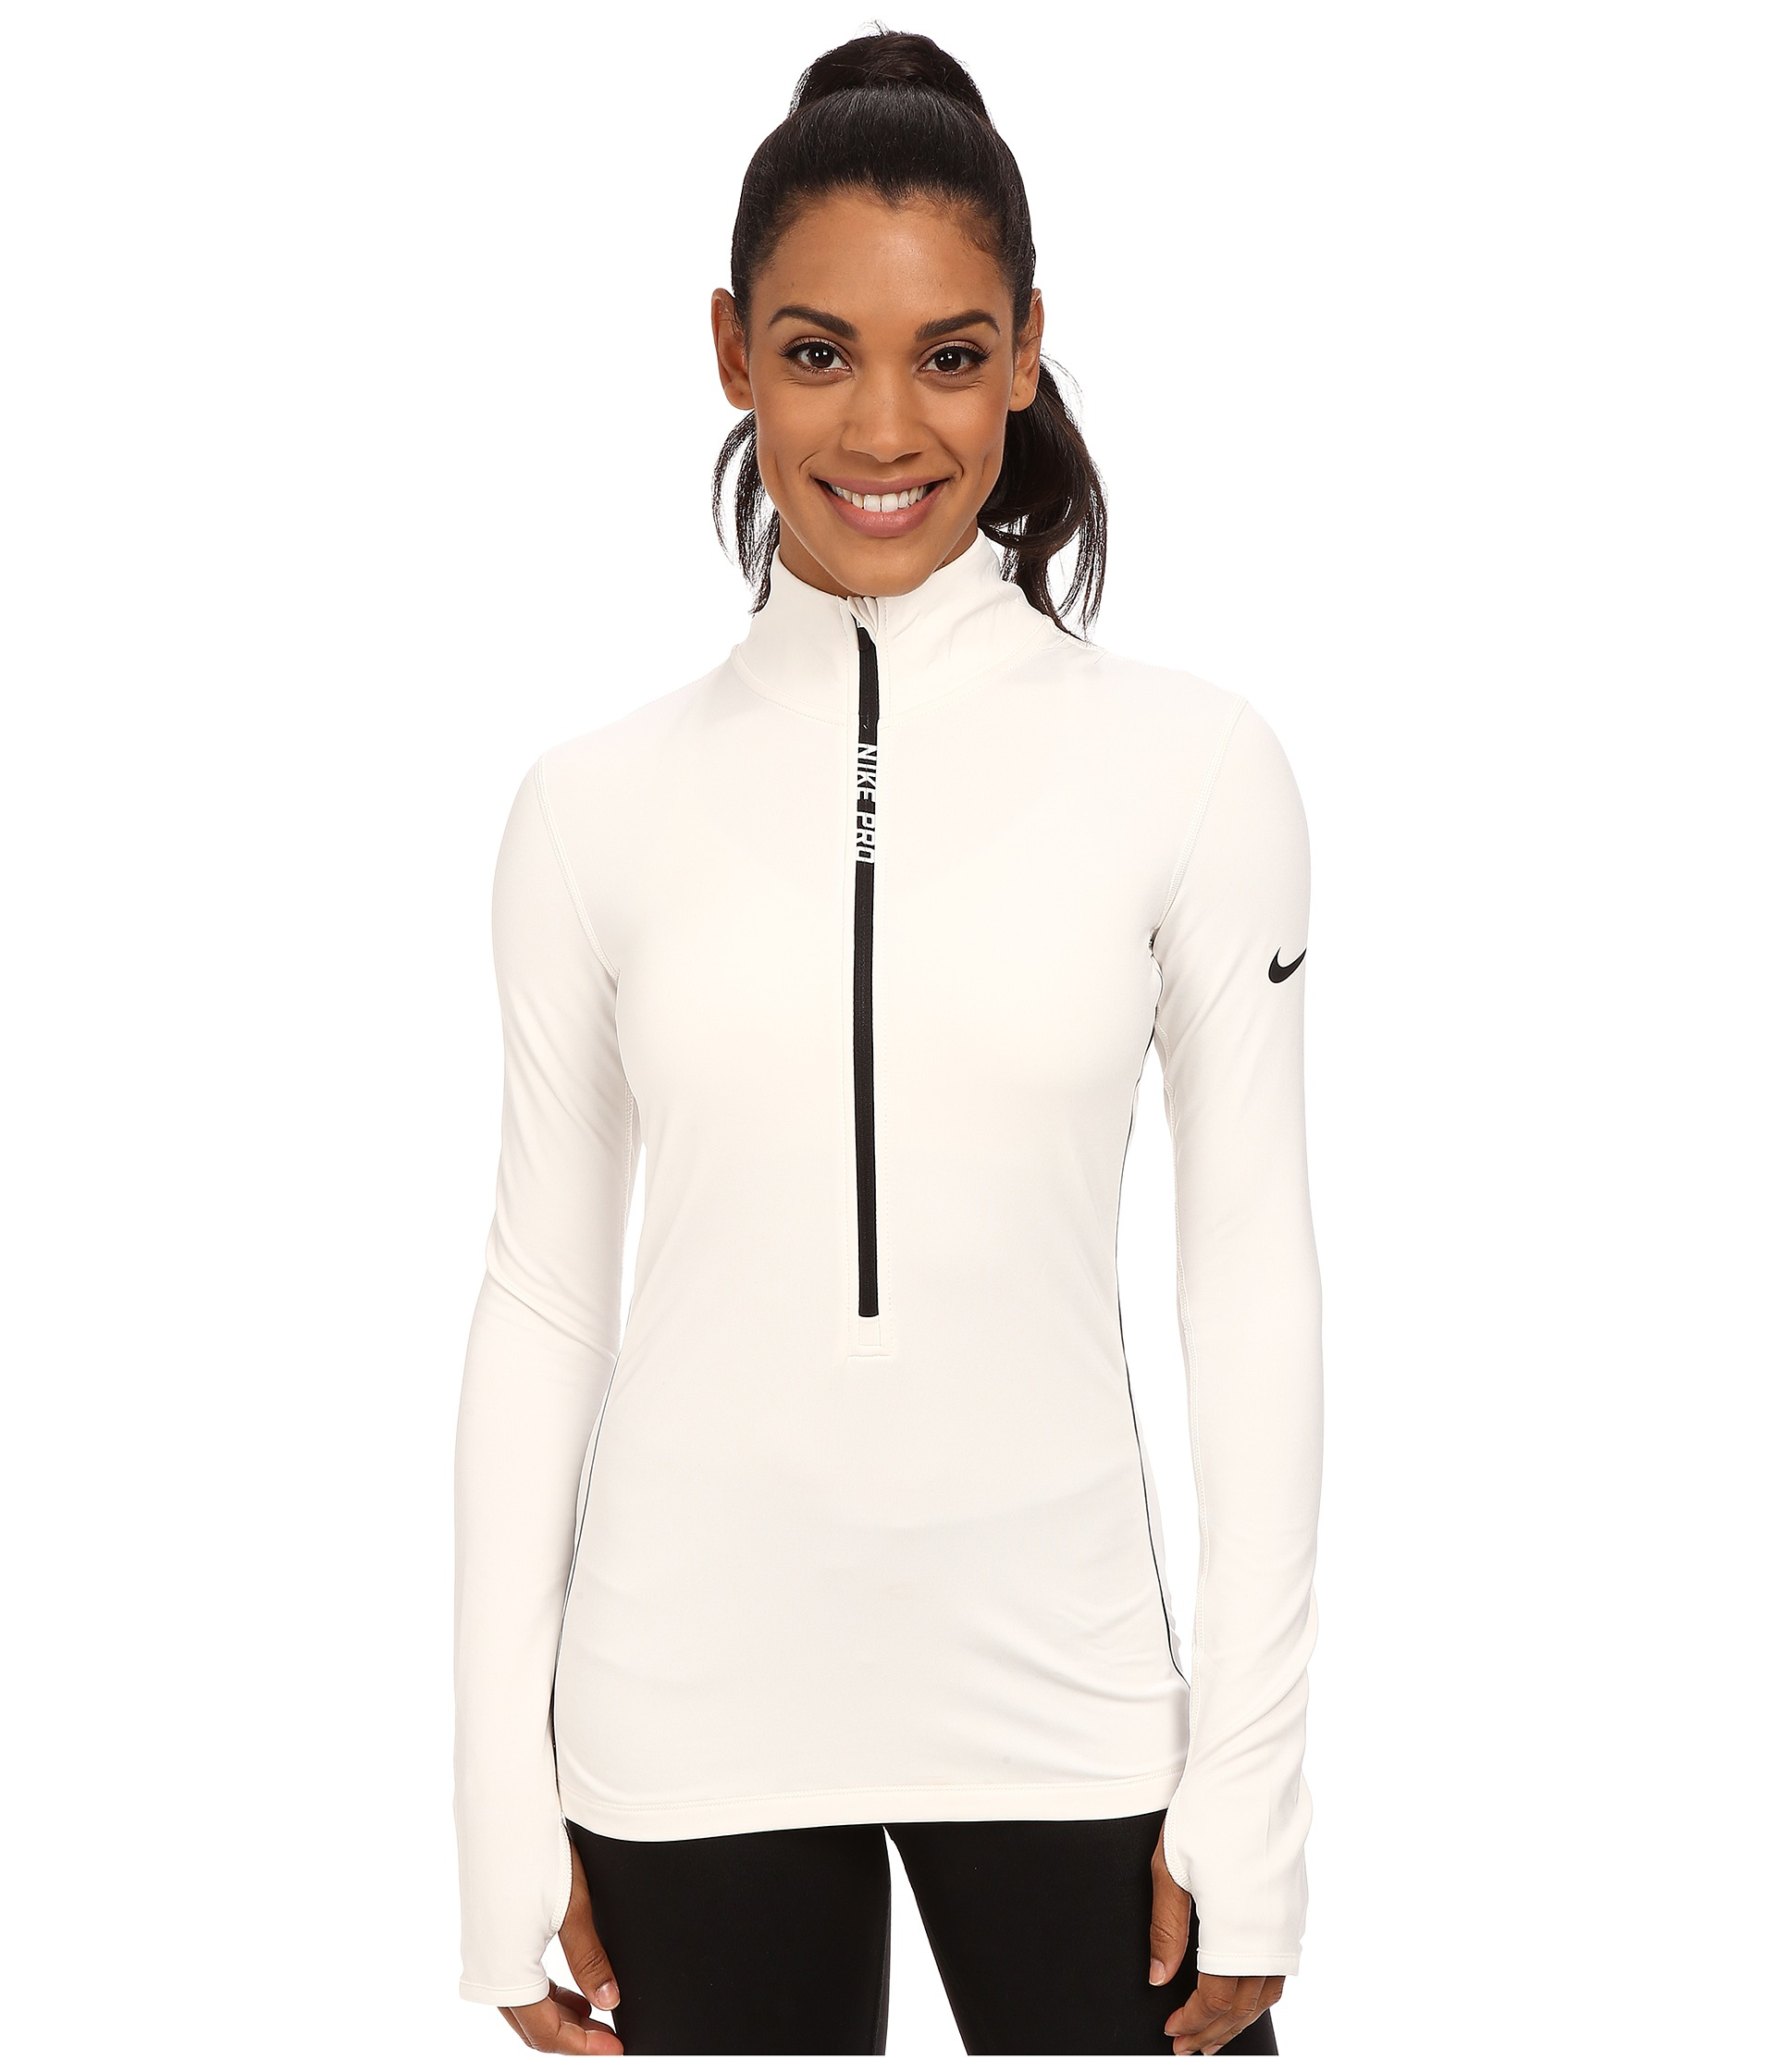 Picasso play actress Nike Pro Hyperwarm Half Zip in White | Lyst